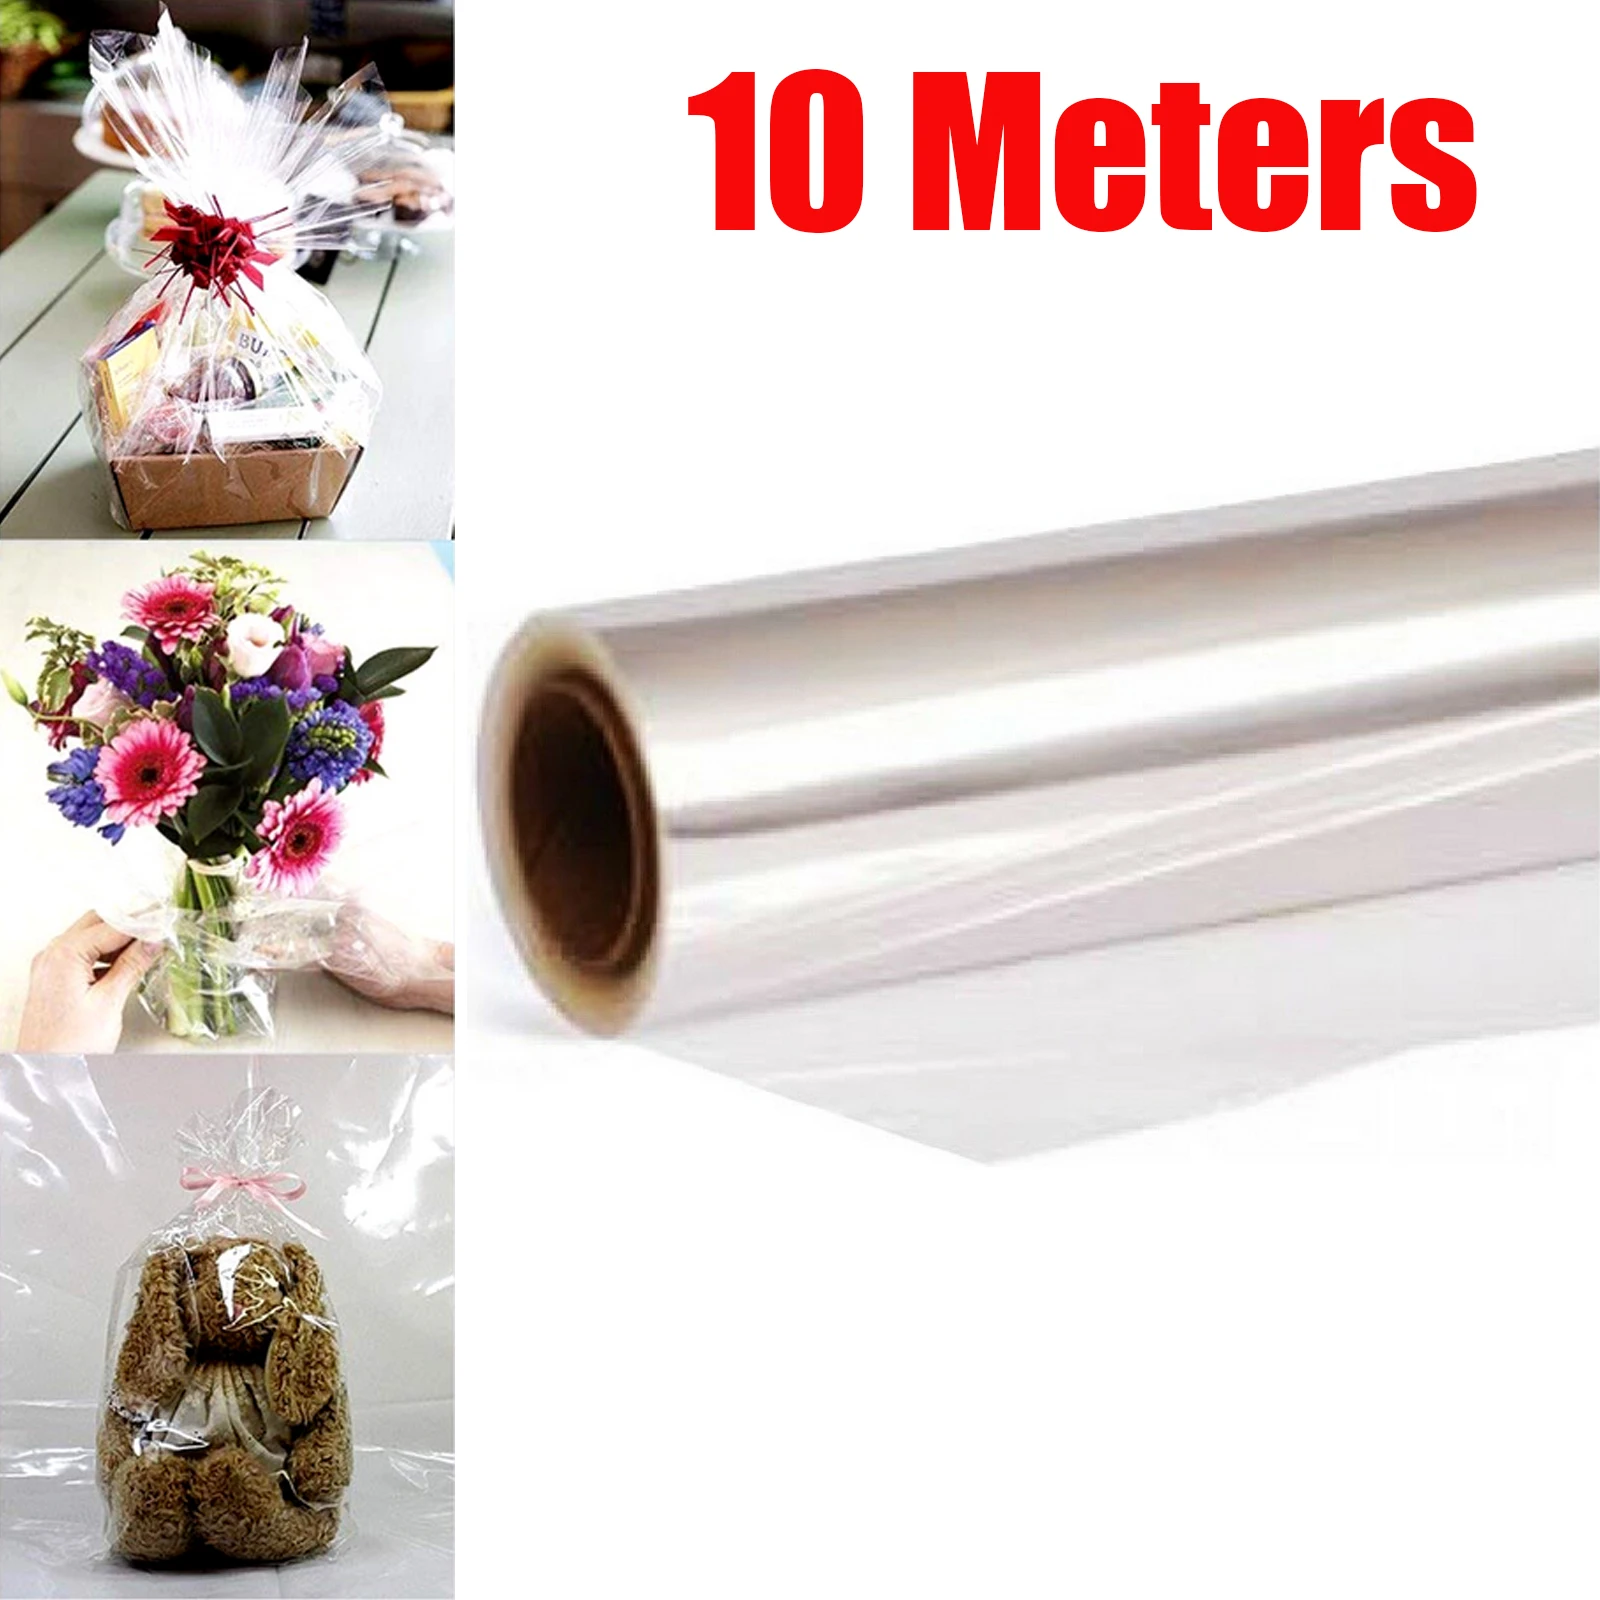 100x54cm Clear Cellophane Wrap Roll For Gift Flower Bouquet Baskets Wrapping Arts Crafts Cellophane Wrapping Paper For Flowers